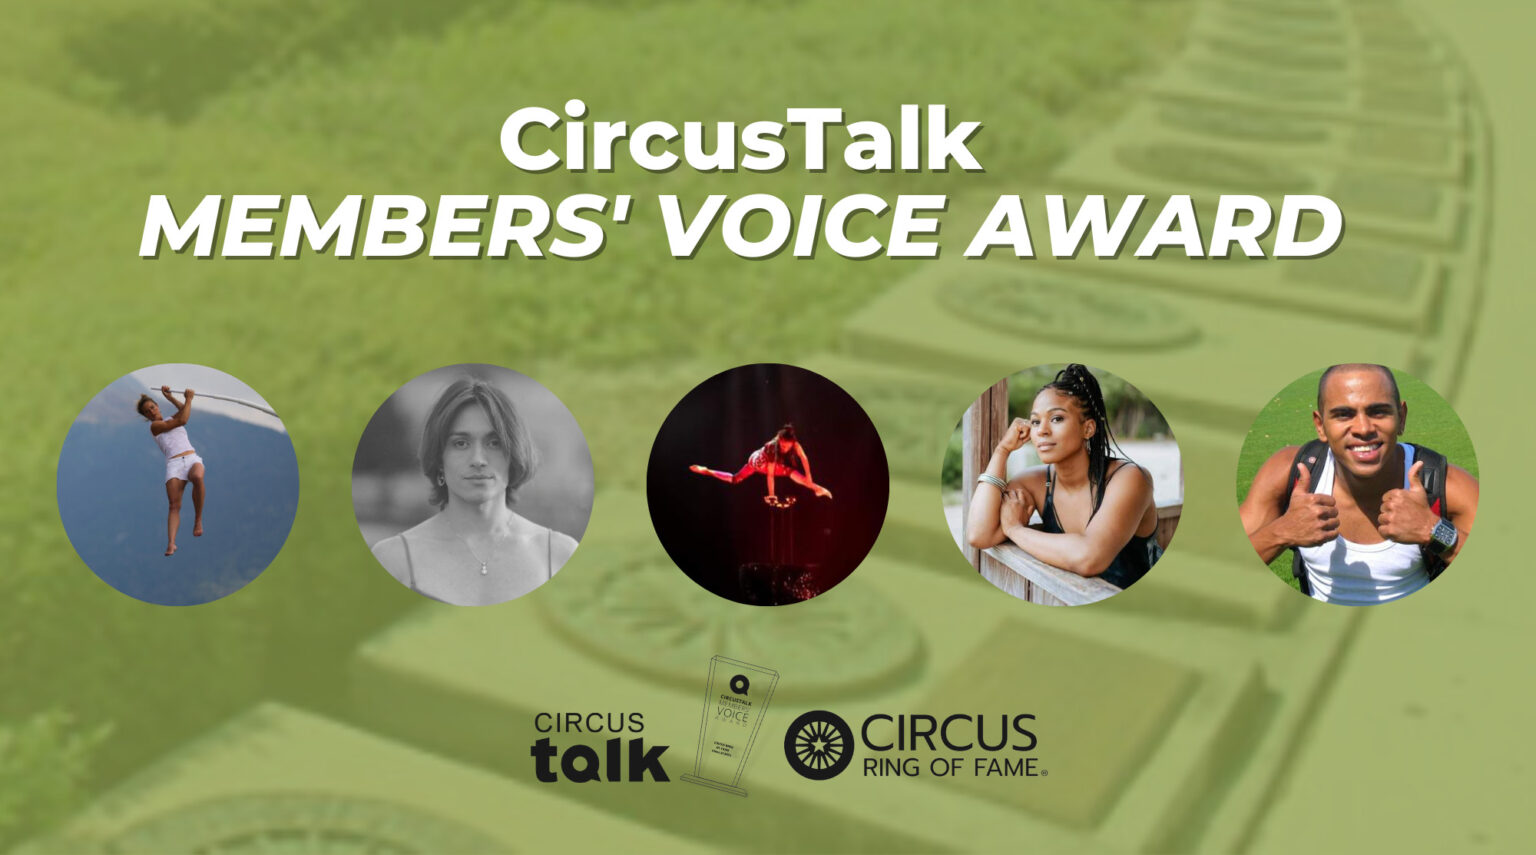 Voting is Now Open for the CircusTalk Members’ Voice Award